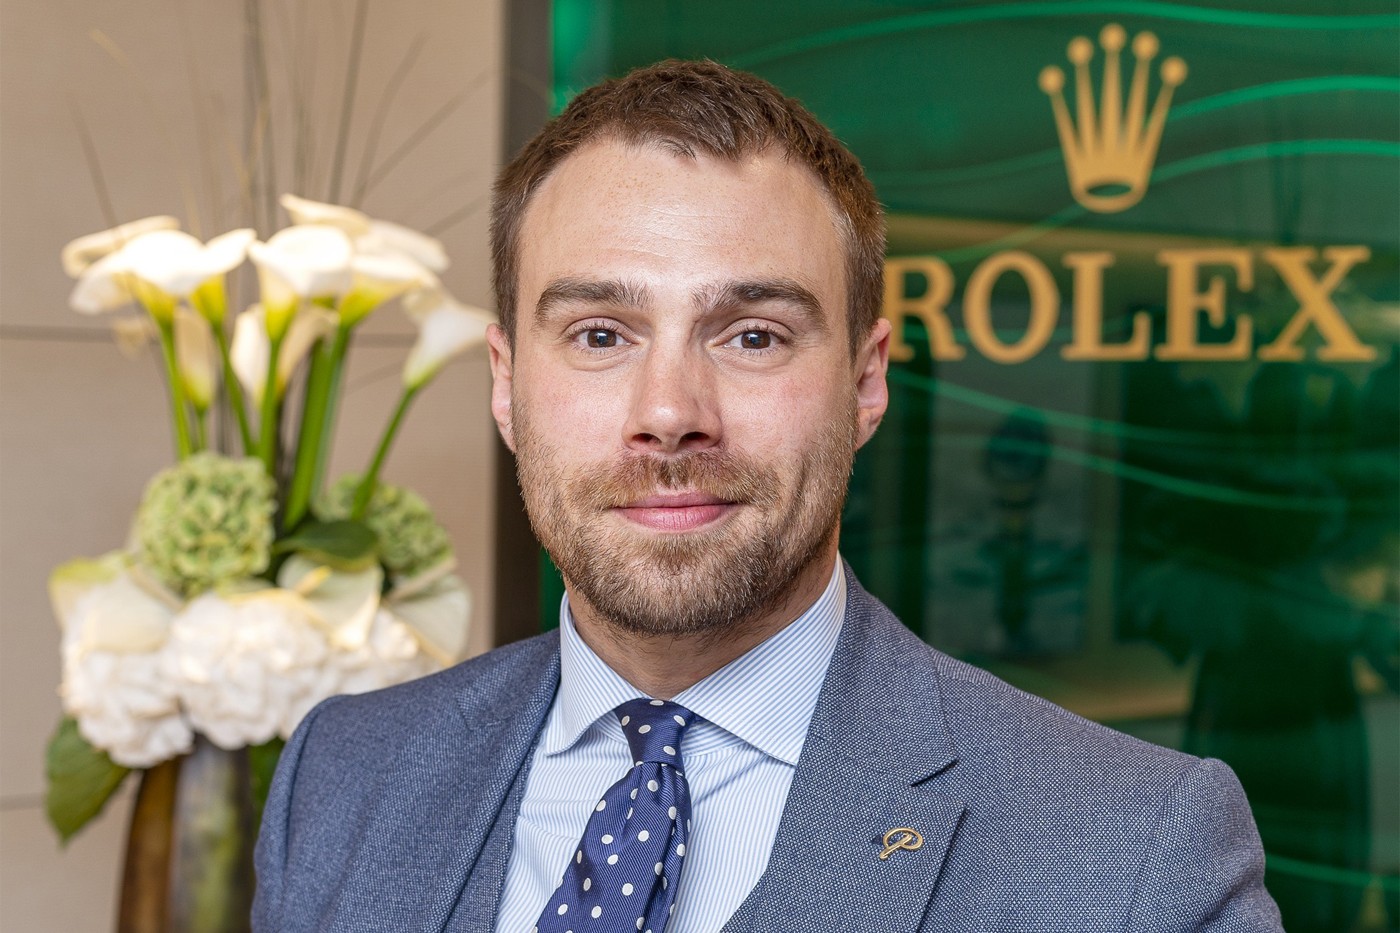 Discover Rolex at Prestons Guildford with Sales Consultant James Edwards-Longhurst